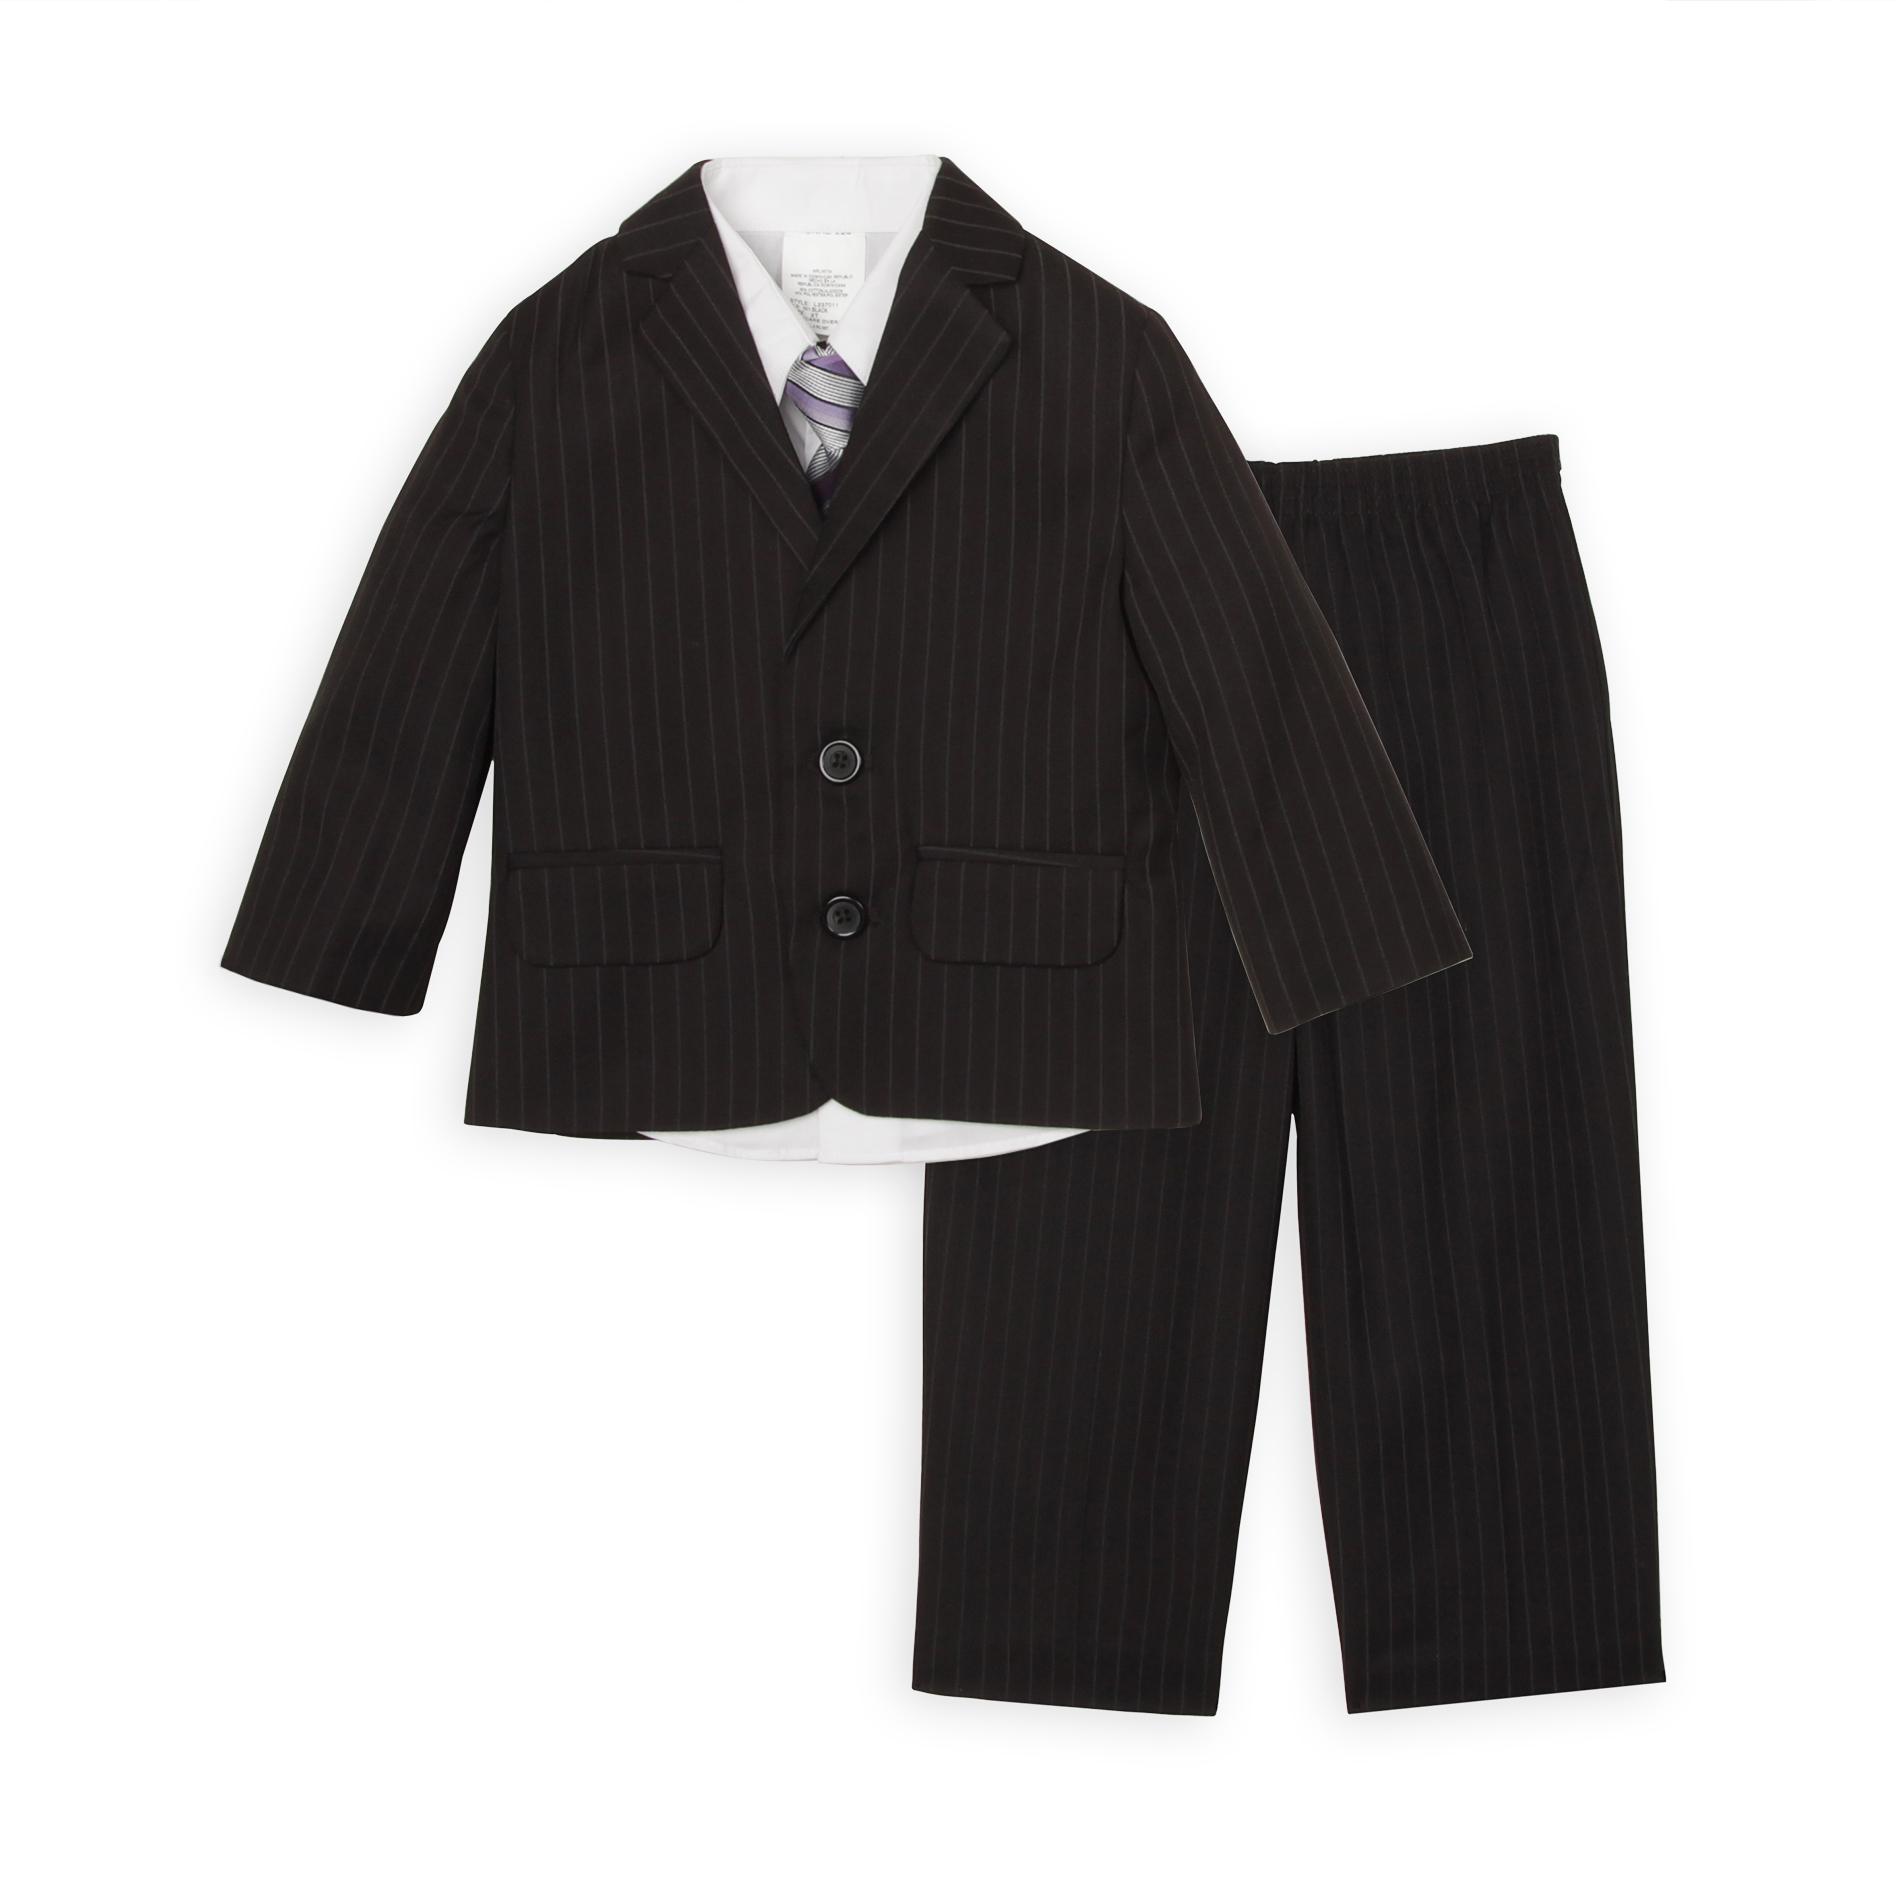 Jonathan Strong Infant & Toddler Boy's Suit Jacket  Shirt  Tie & Pants - Striped